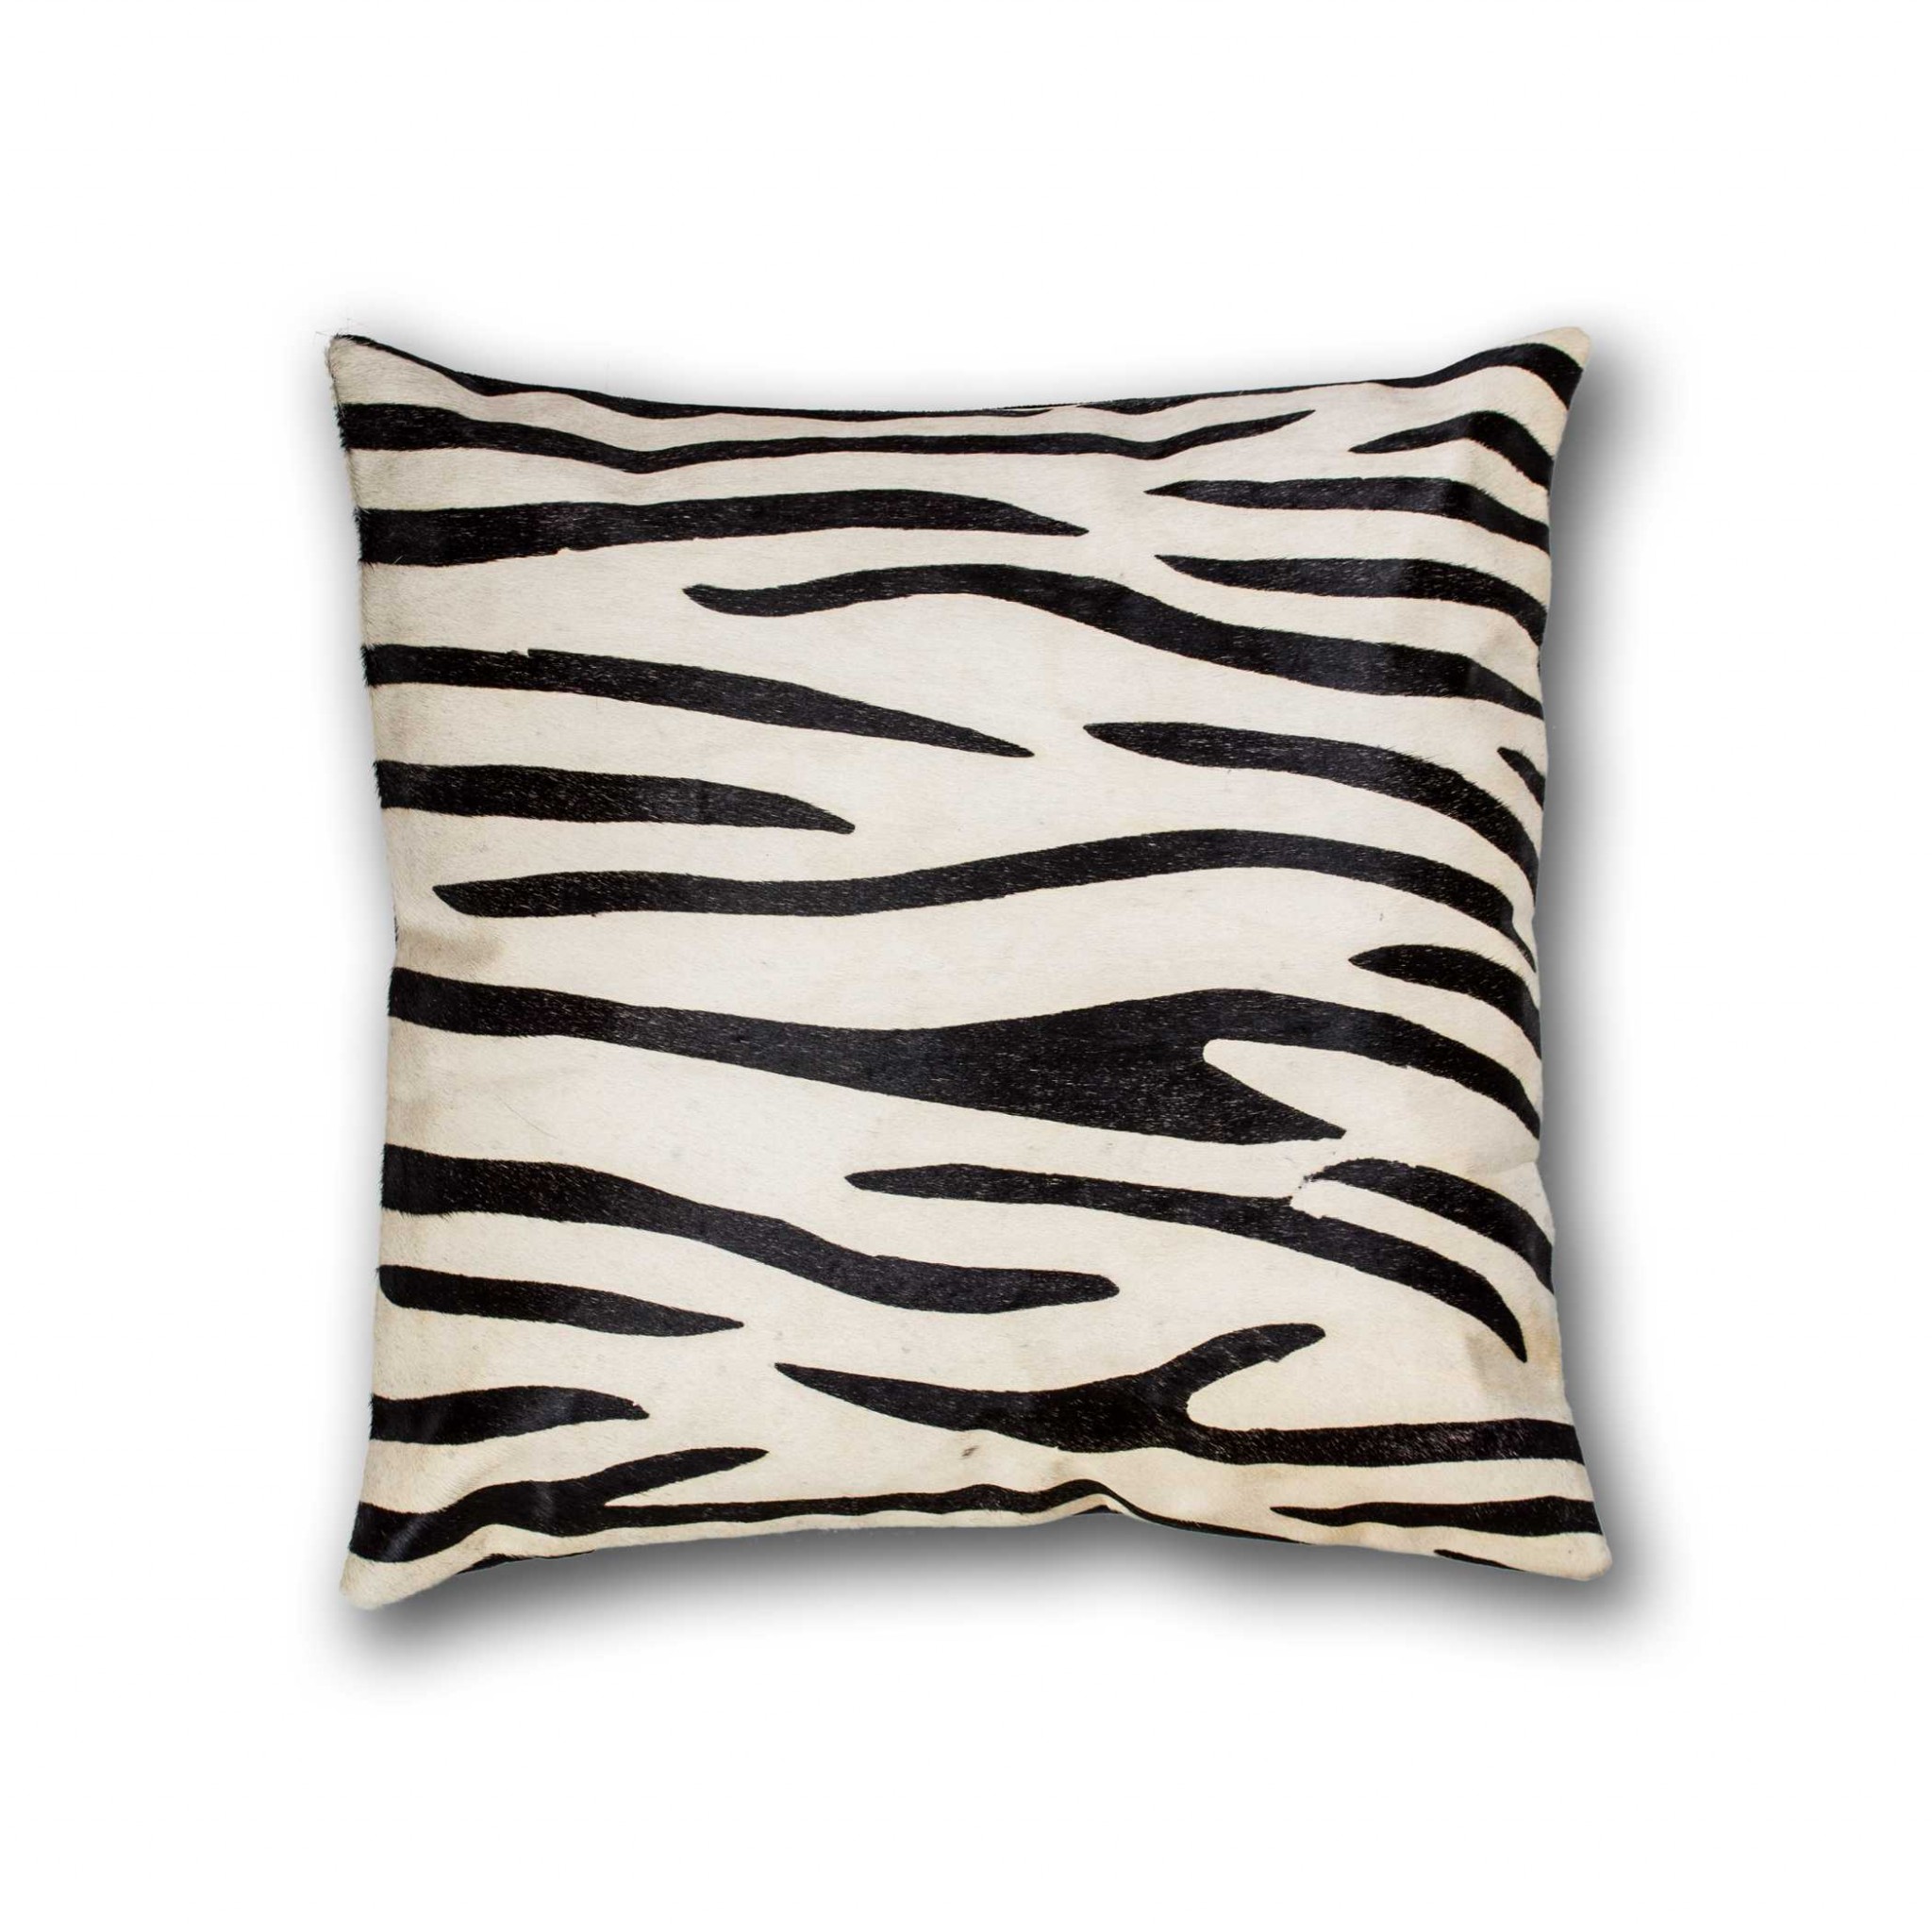 18" x 18" x 5" Black And White Cowhide - Pillow